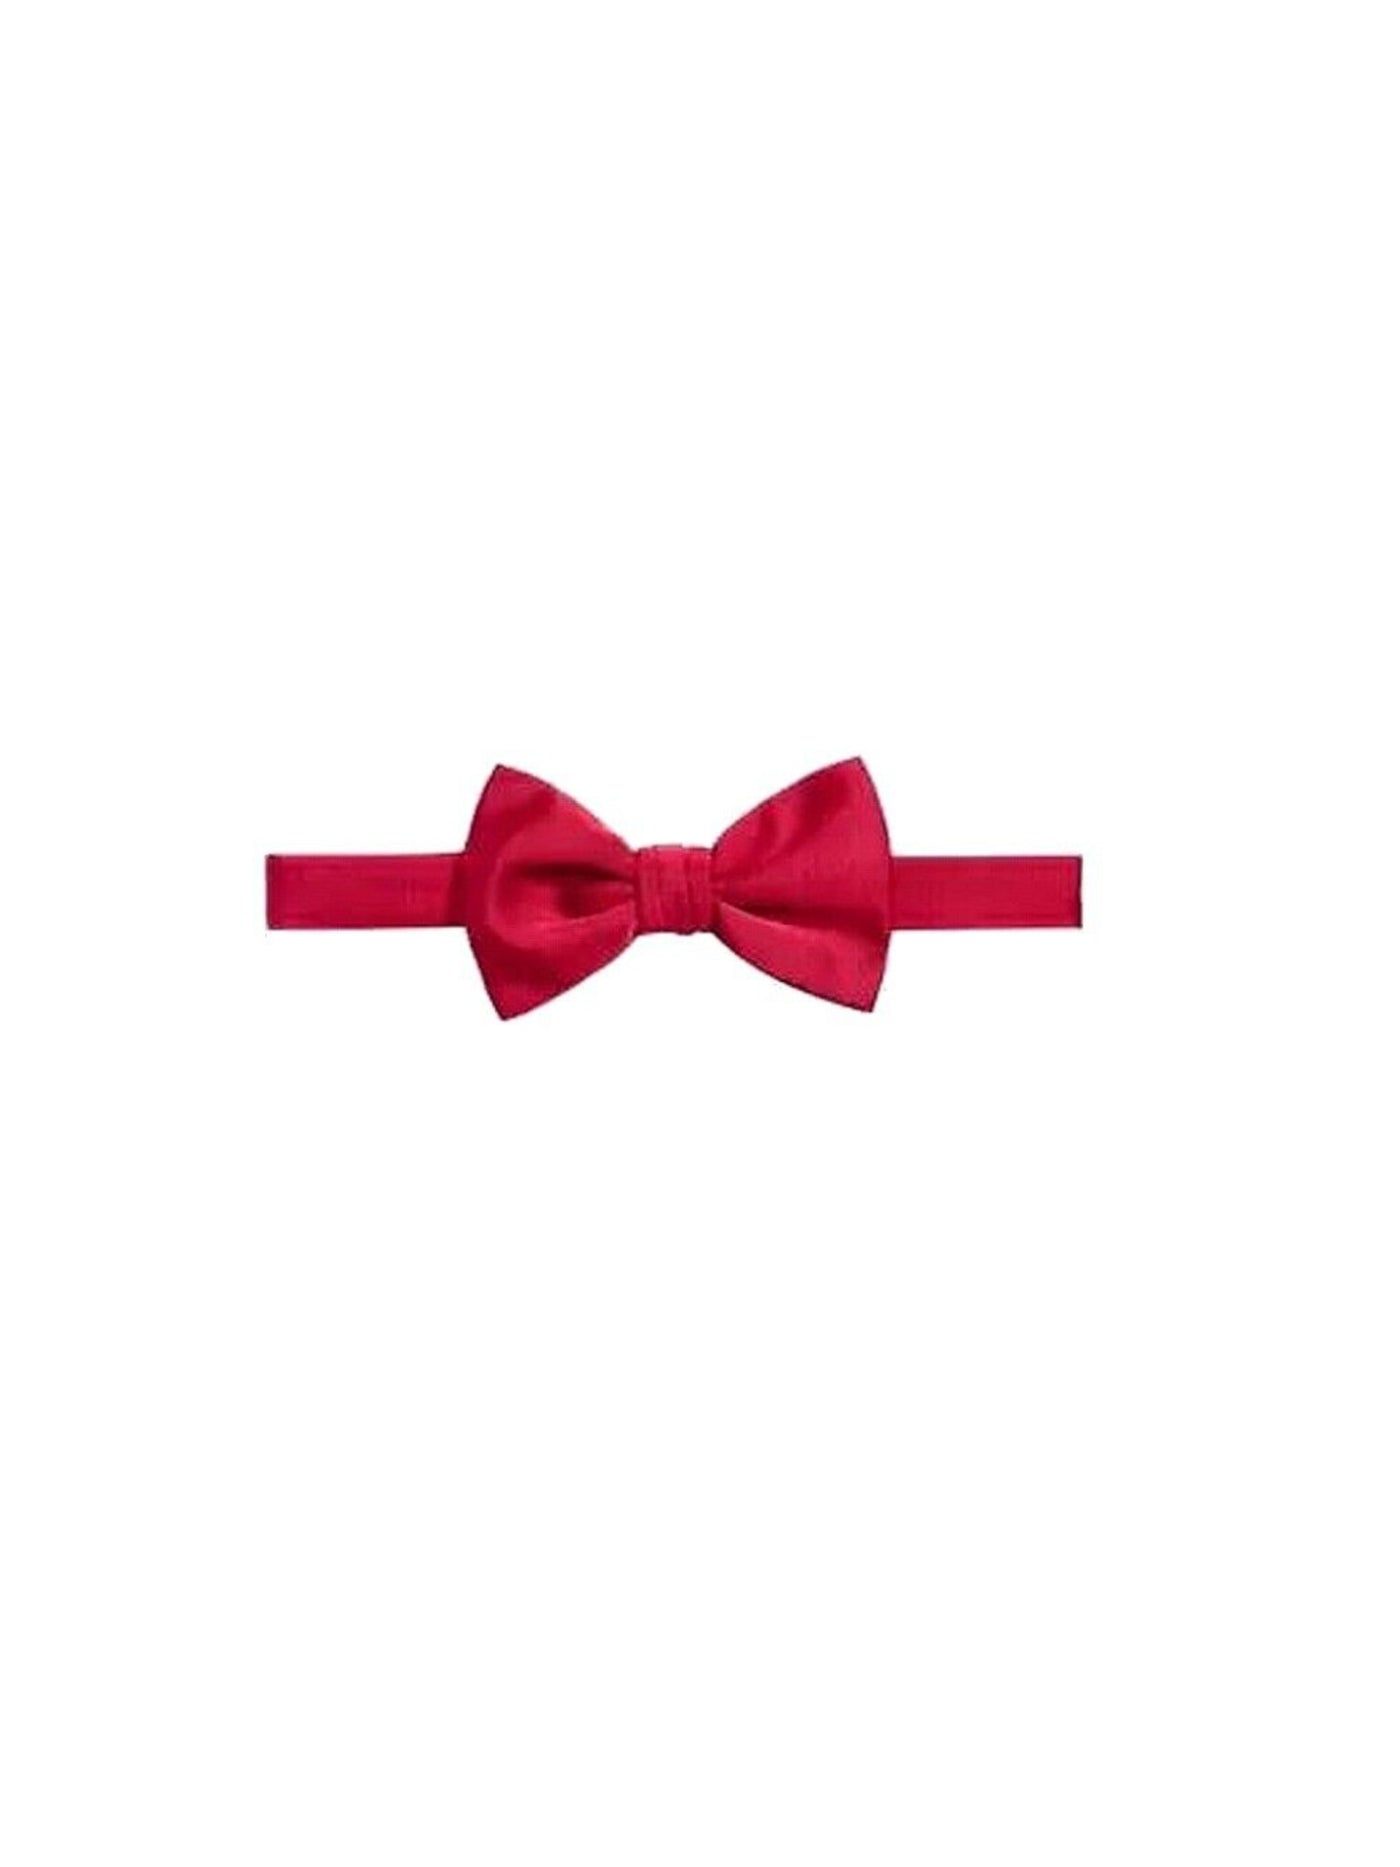 RYAN SEACREST Mens Red Ribbed Solid Pre-Tied Bow Tie